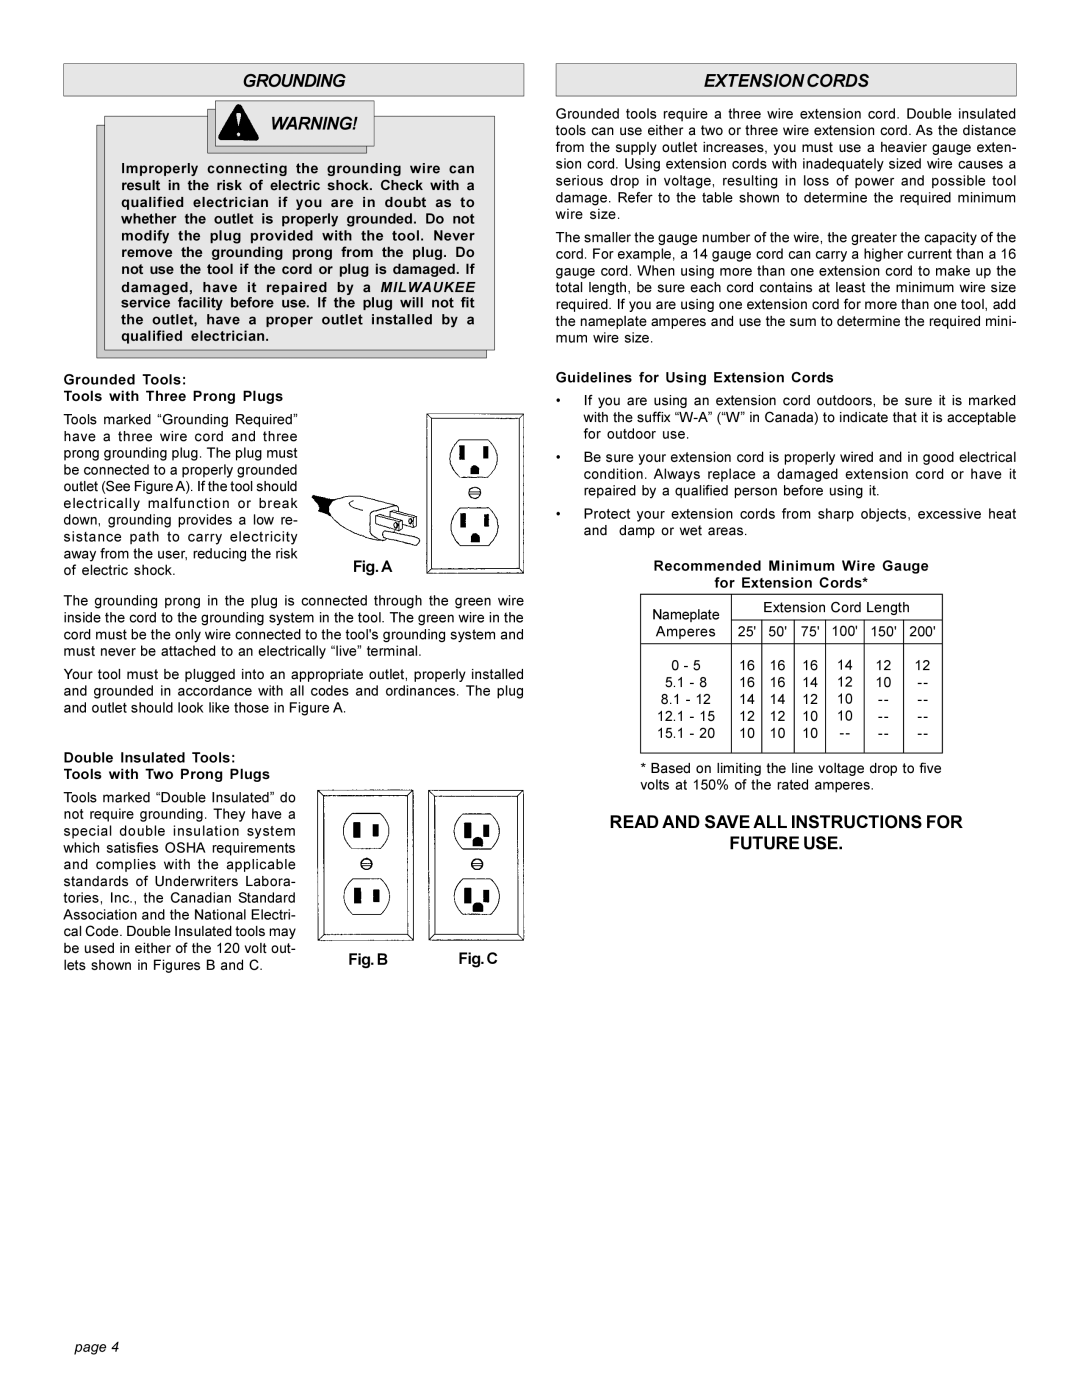 Milwaukee 6276 Grounding, Extension Cords, Read And Save All Instructions For Future Use, Fig. A, Fig. B, Fig. C, page 